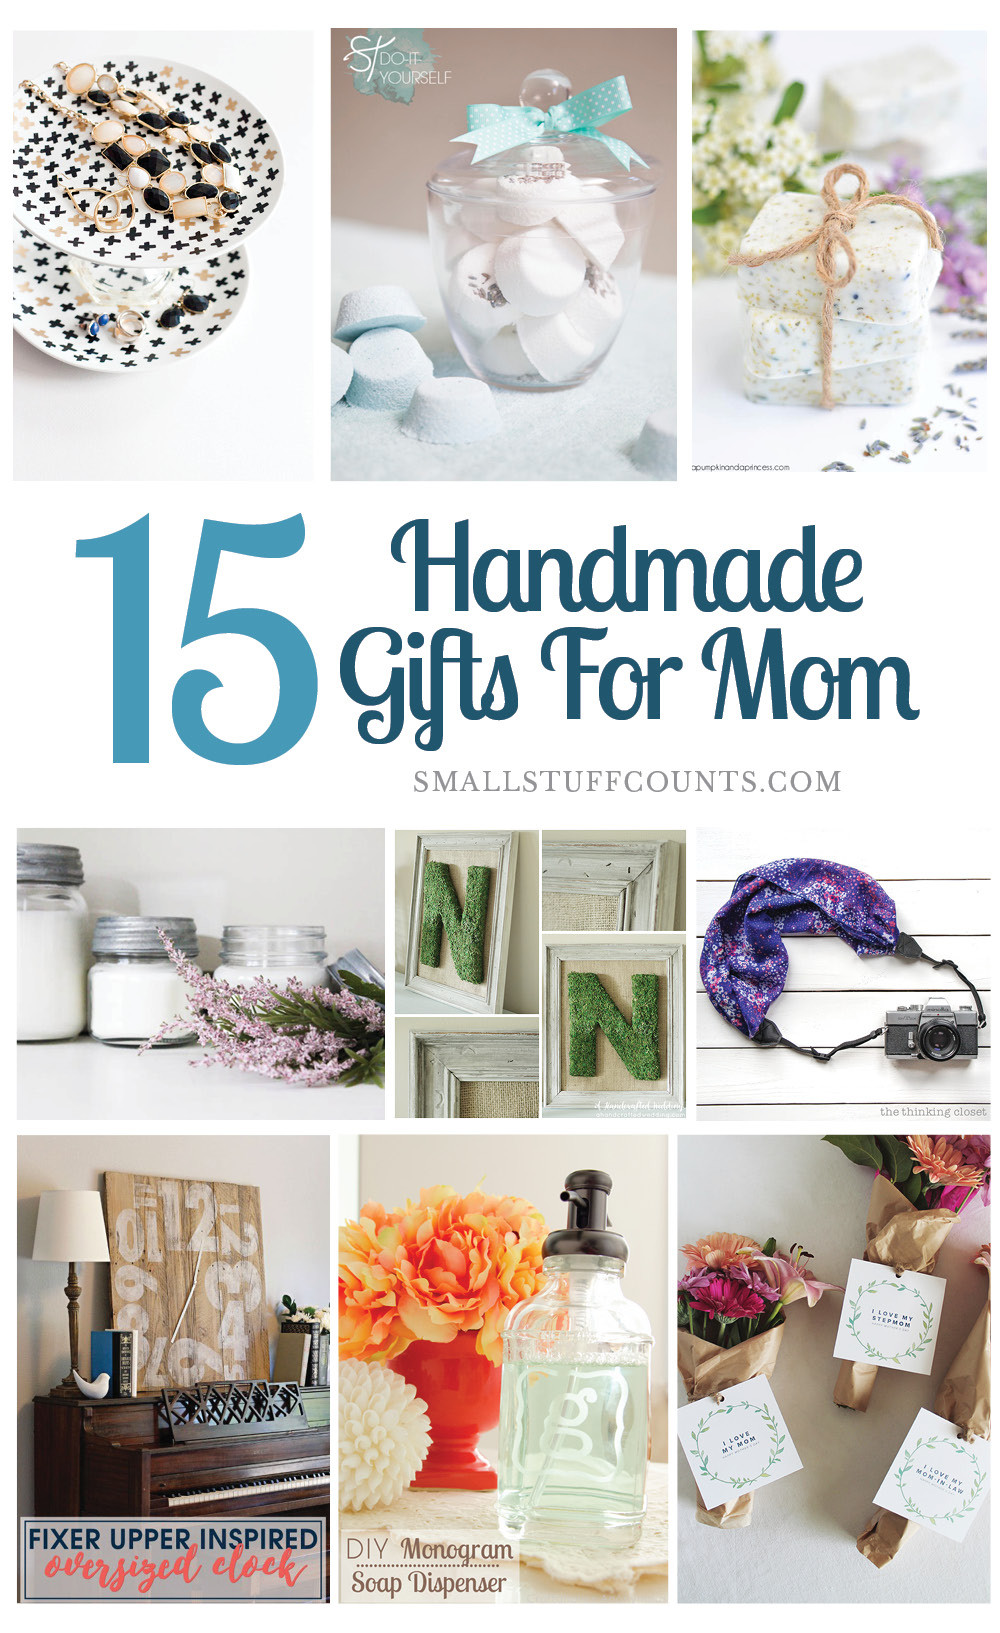 Gift Ideas For A Mother
 Beautiful DIY Gift Ideas For Mom